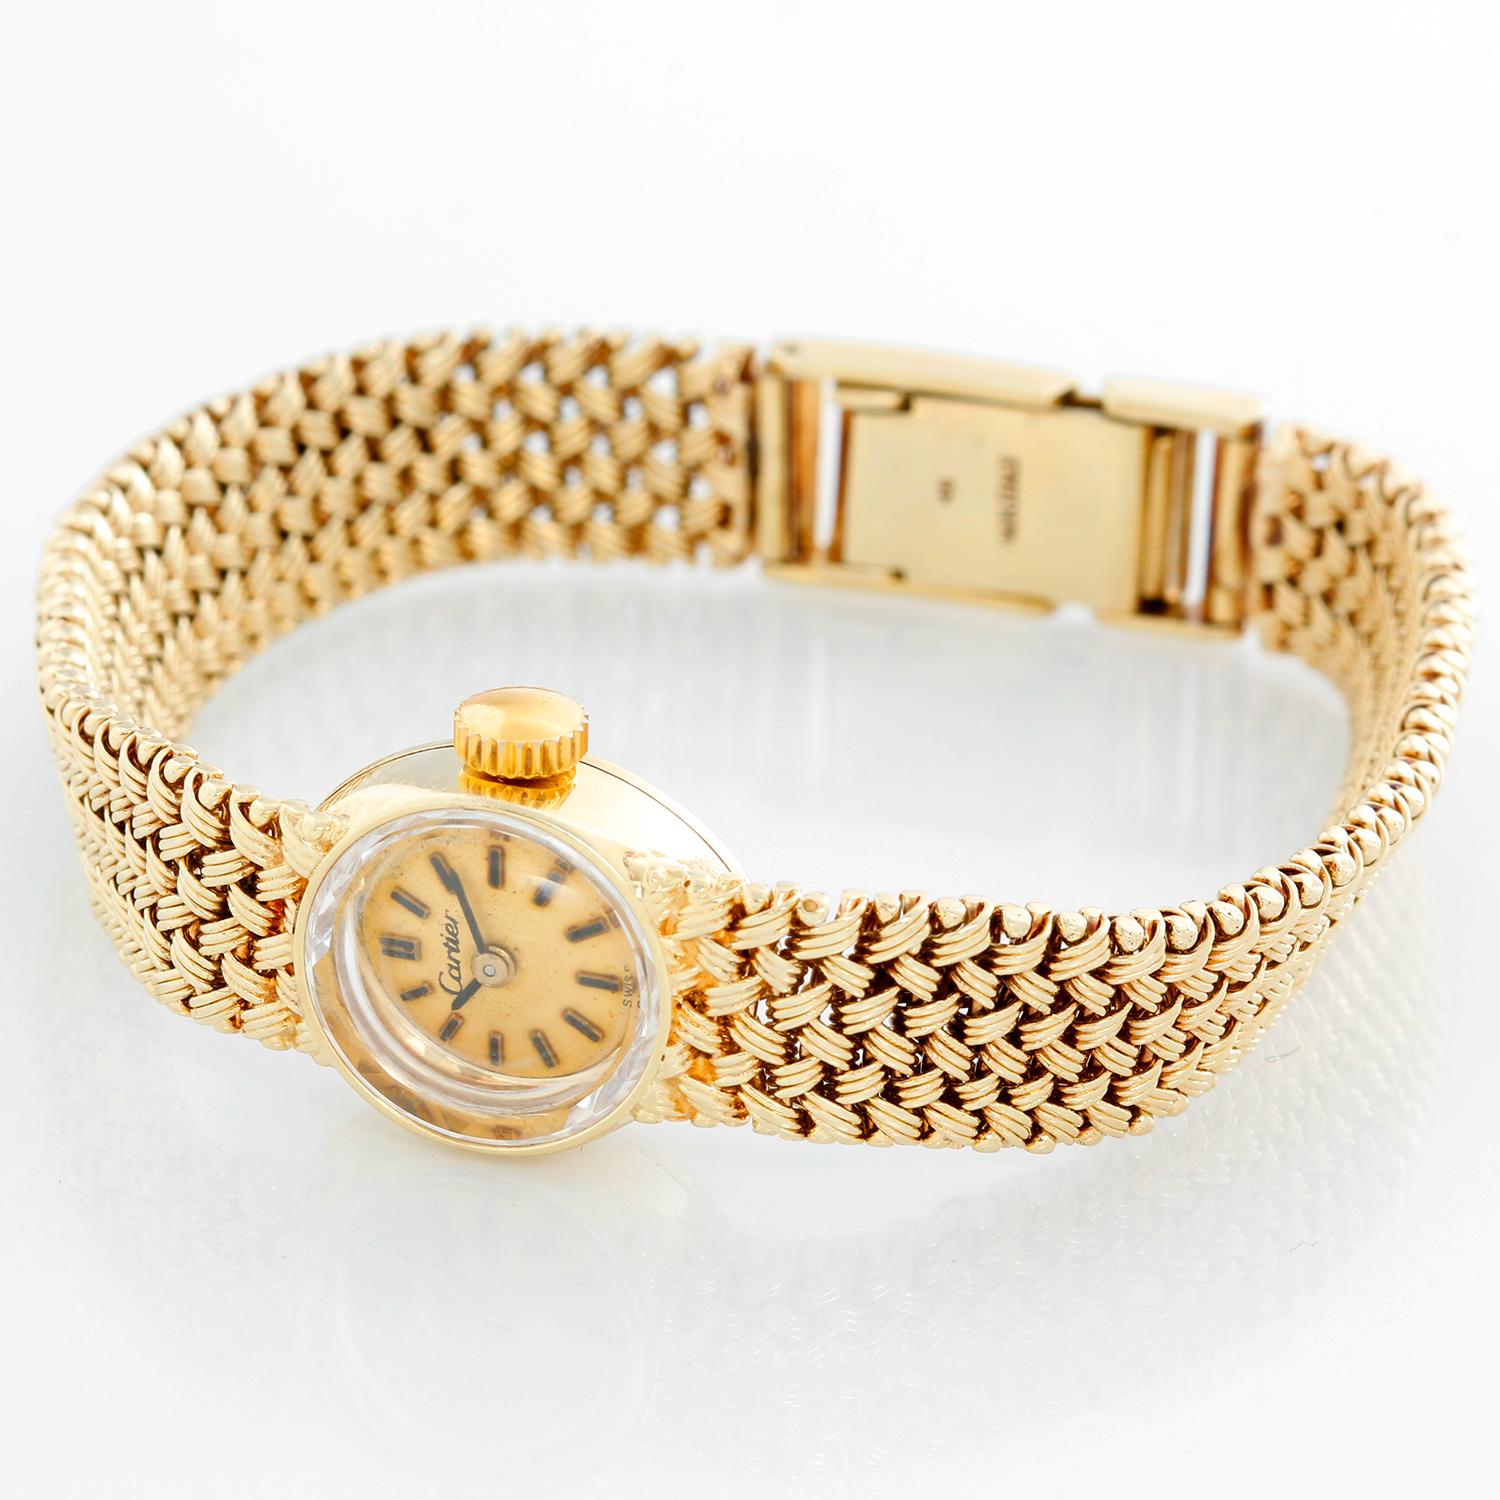 Vintage Cartier 18K Yellow Gold Ladies Watch - Mechanical. 18K Yellow gold case (15 mm ). Champagne dial with stick hour markers. 18K Yellow gold mesh bracelet; will fit a 6 1/2 inch wrist. Pre-owned with Cartier box .